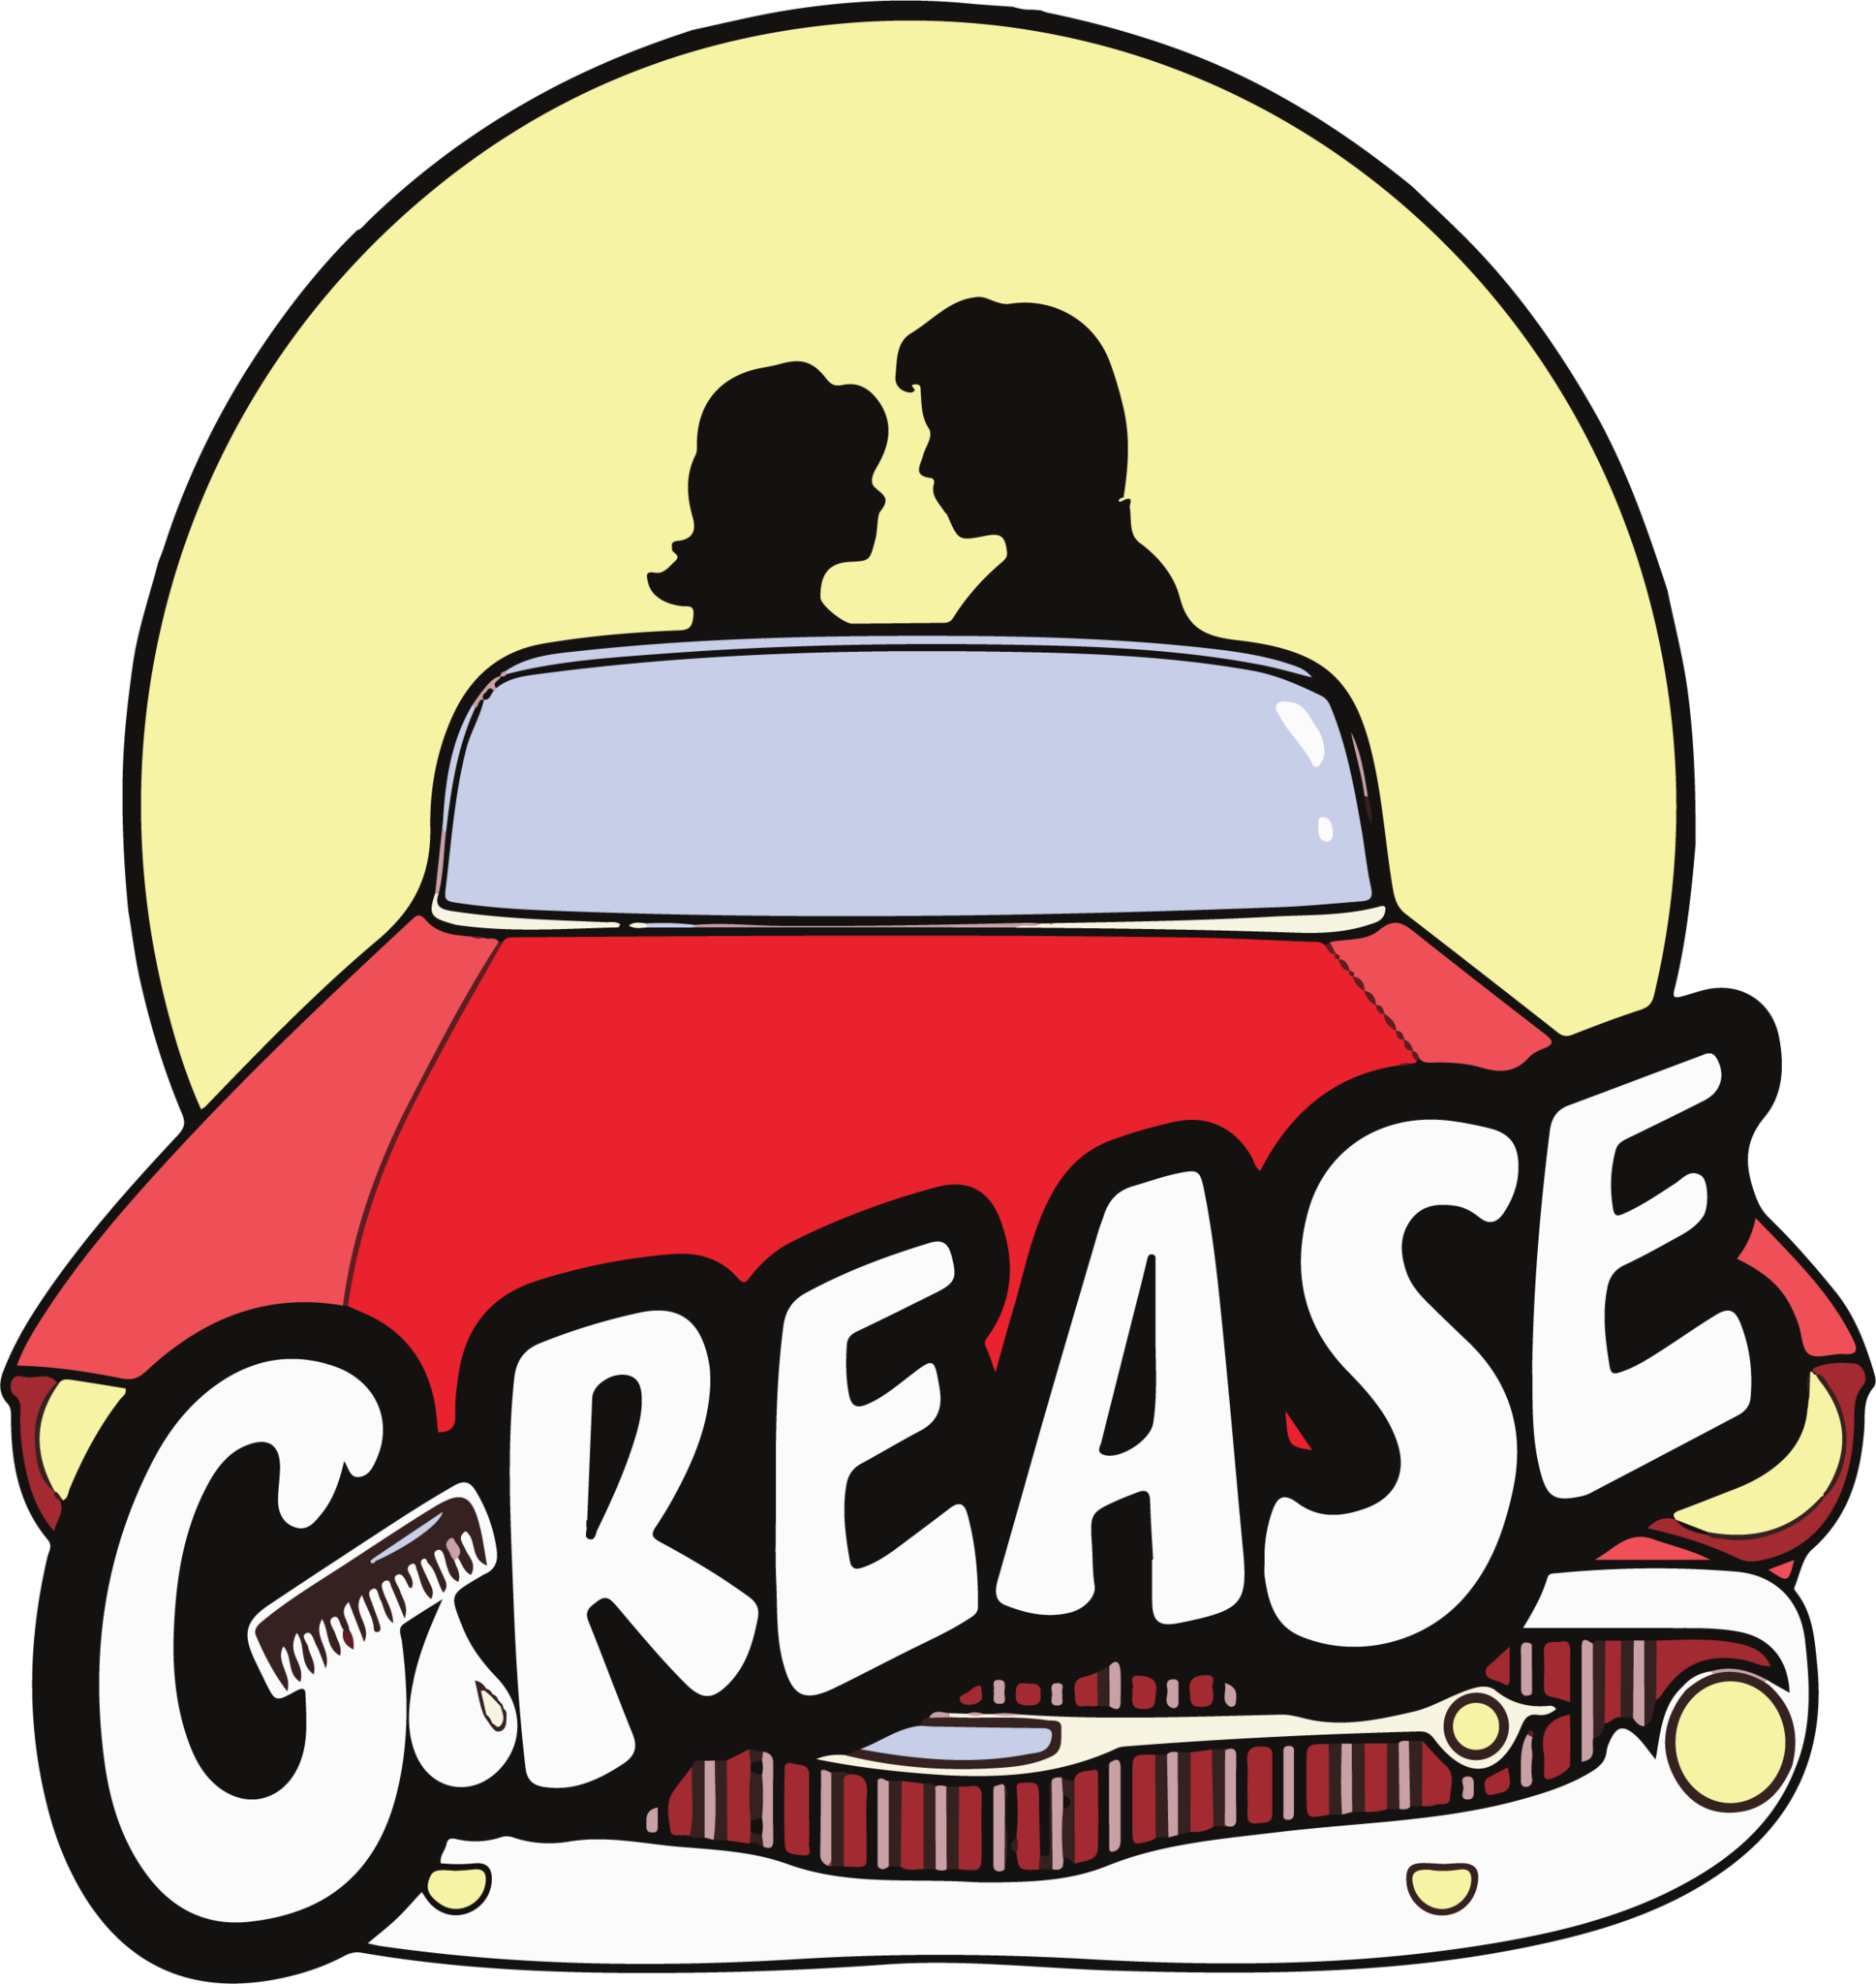 Grease logo showing classic car and people in the car